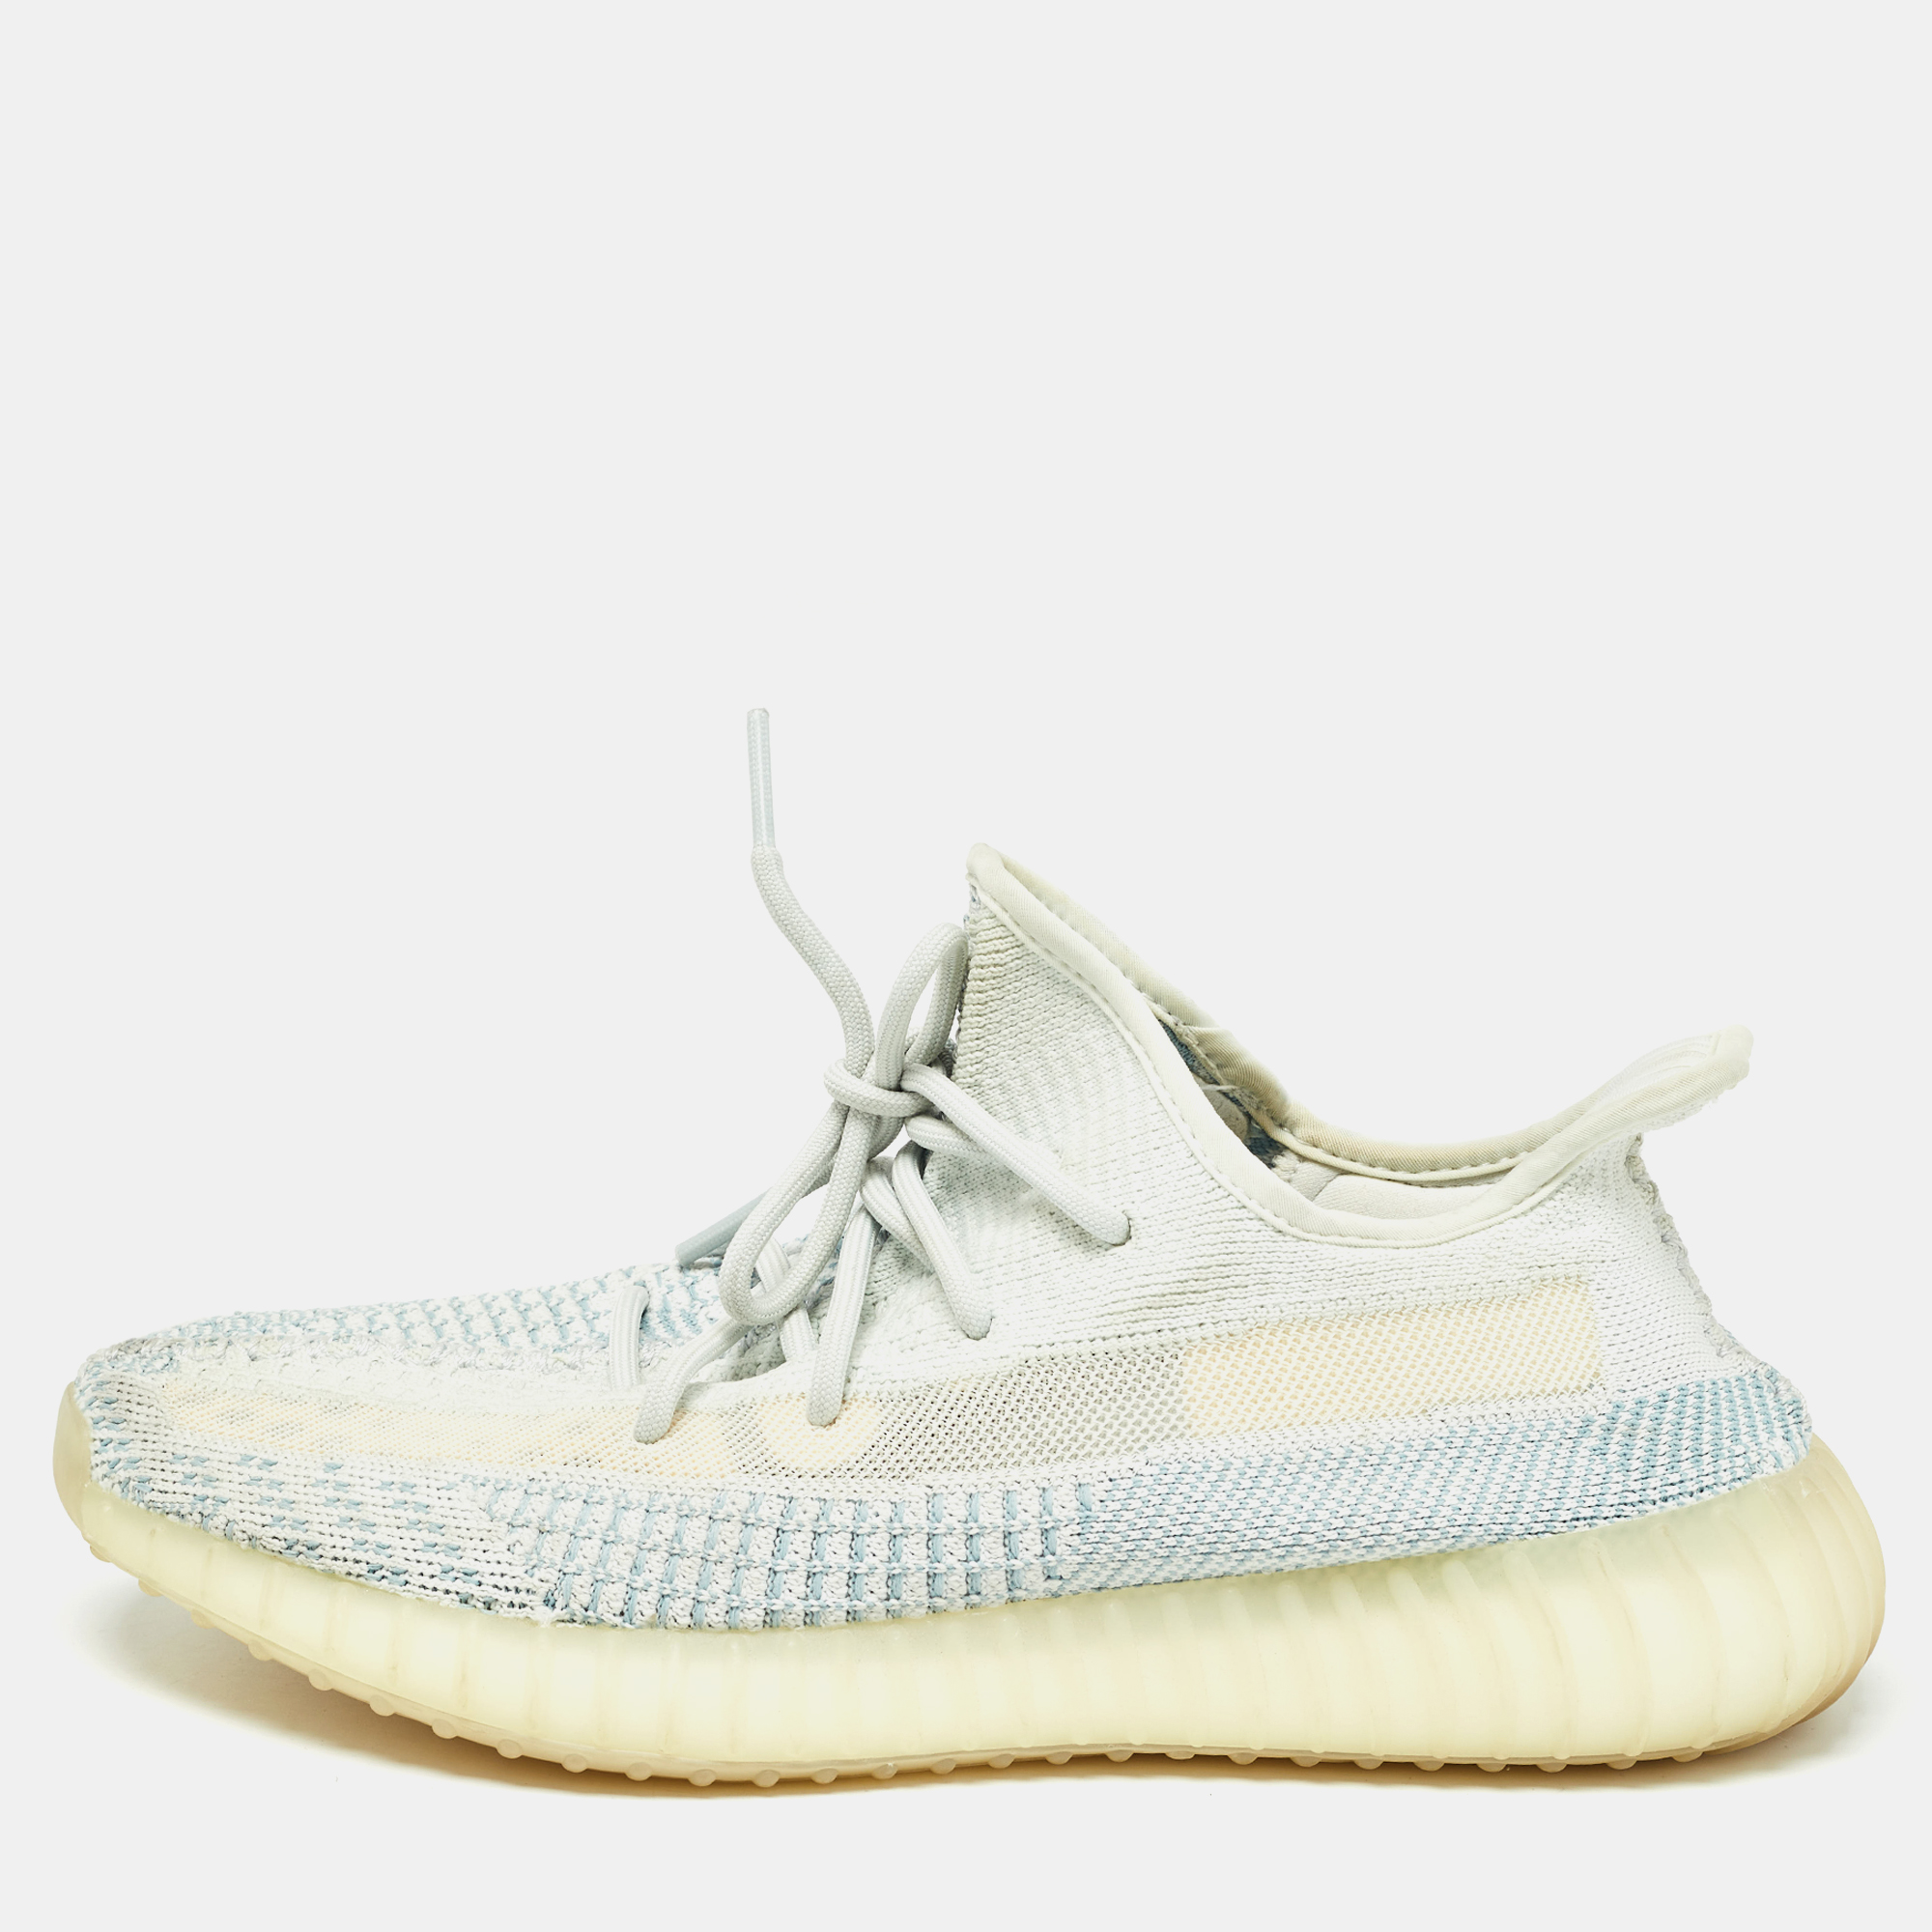 Yeezy x adidas white/green knit fabric boost 350 v2 cloud white non reflective sneakers size 44